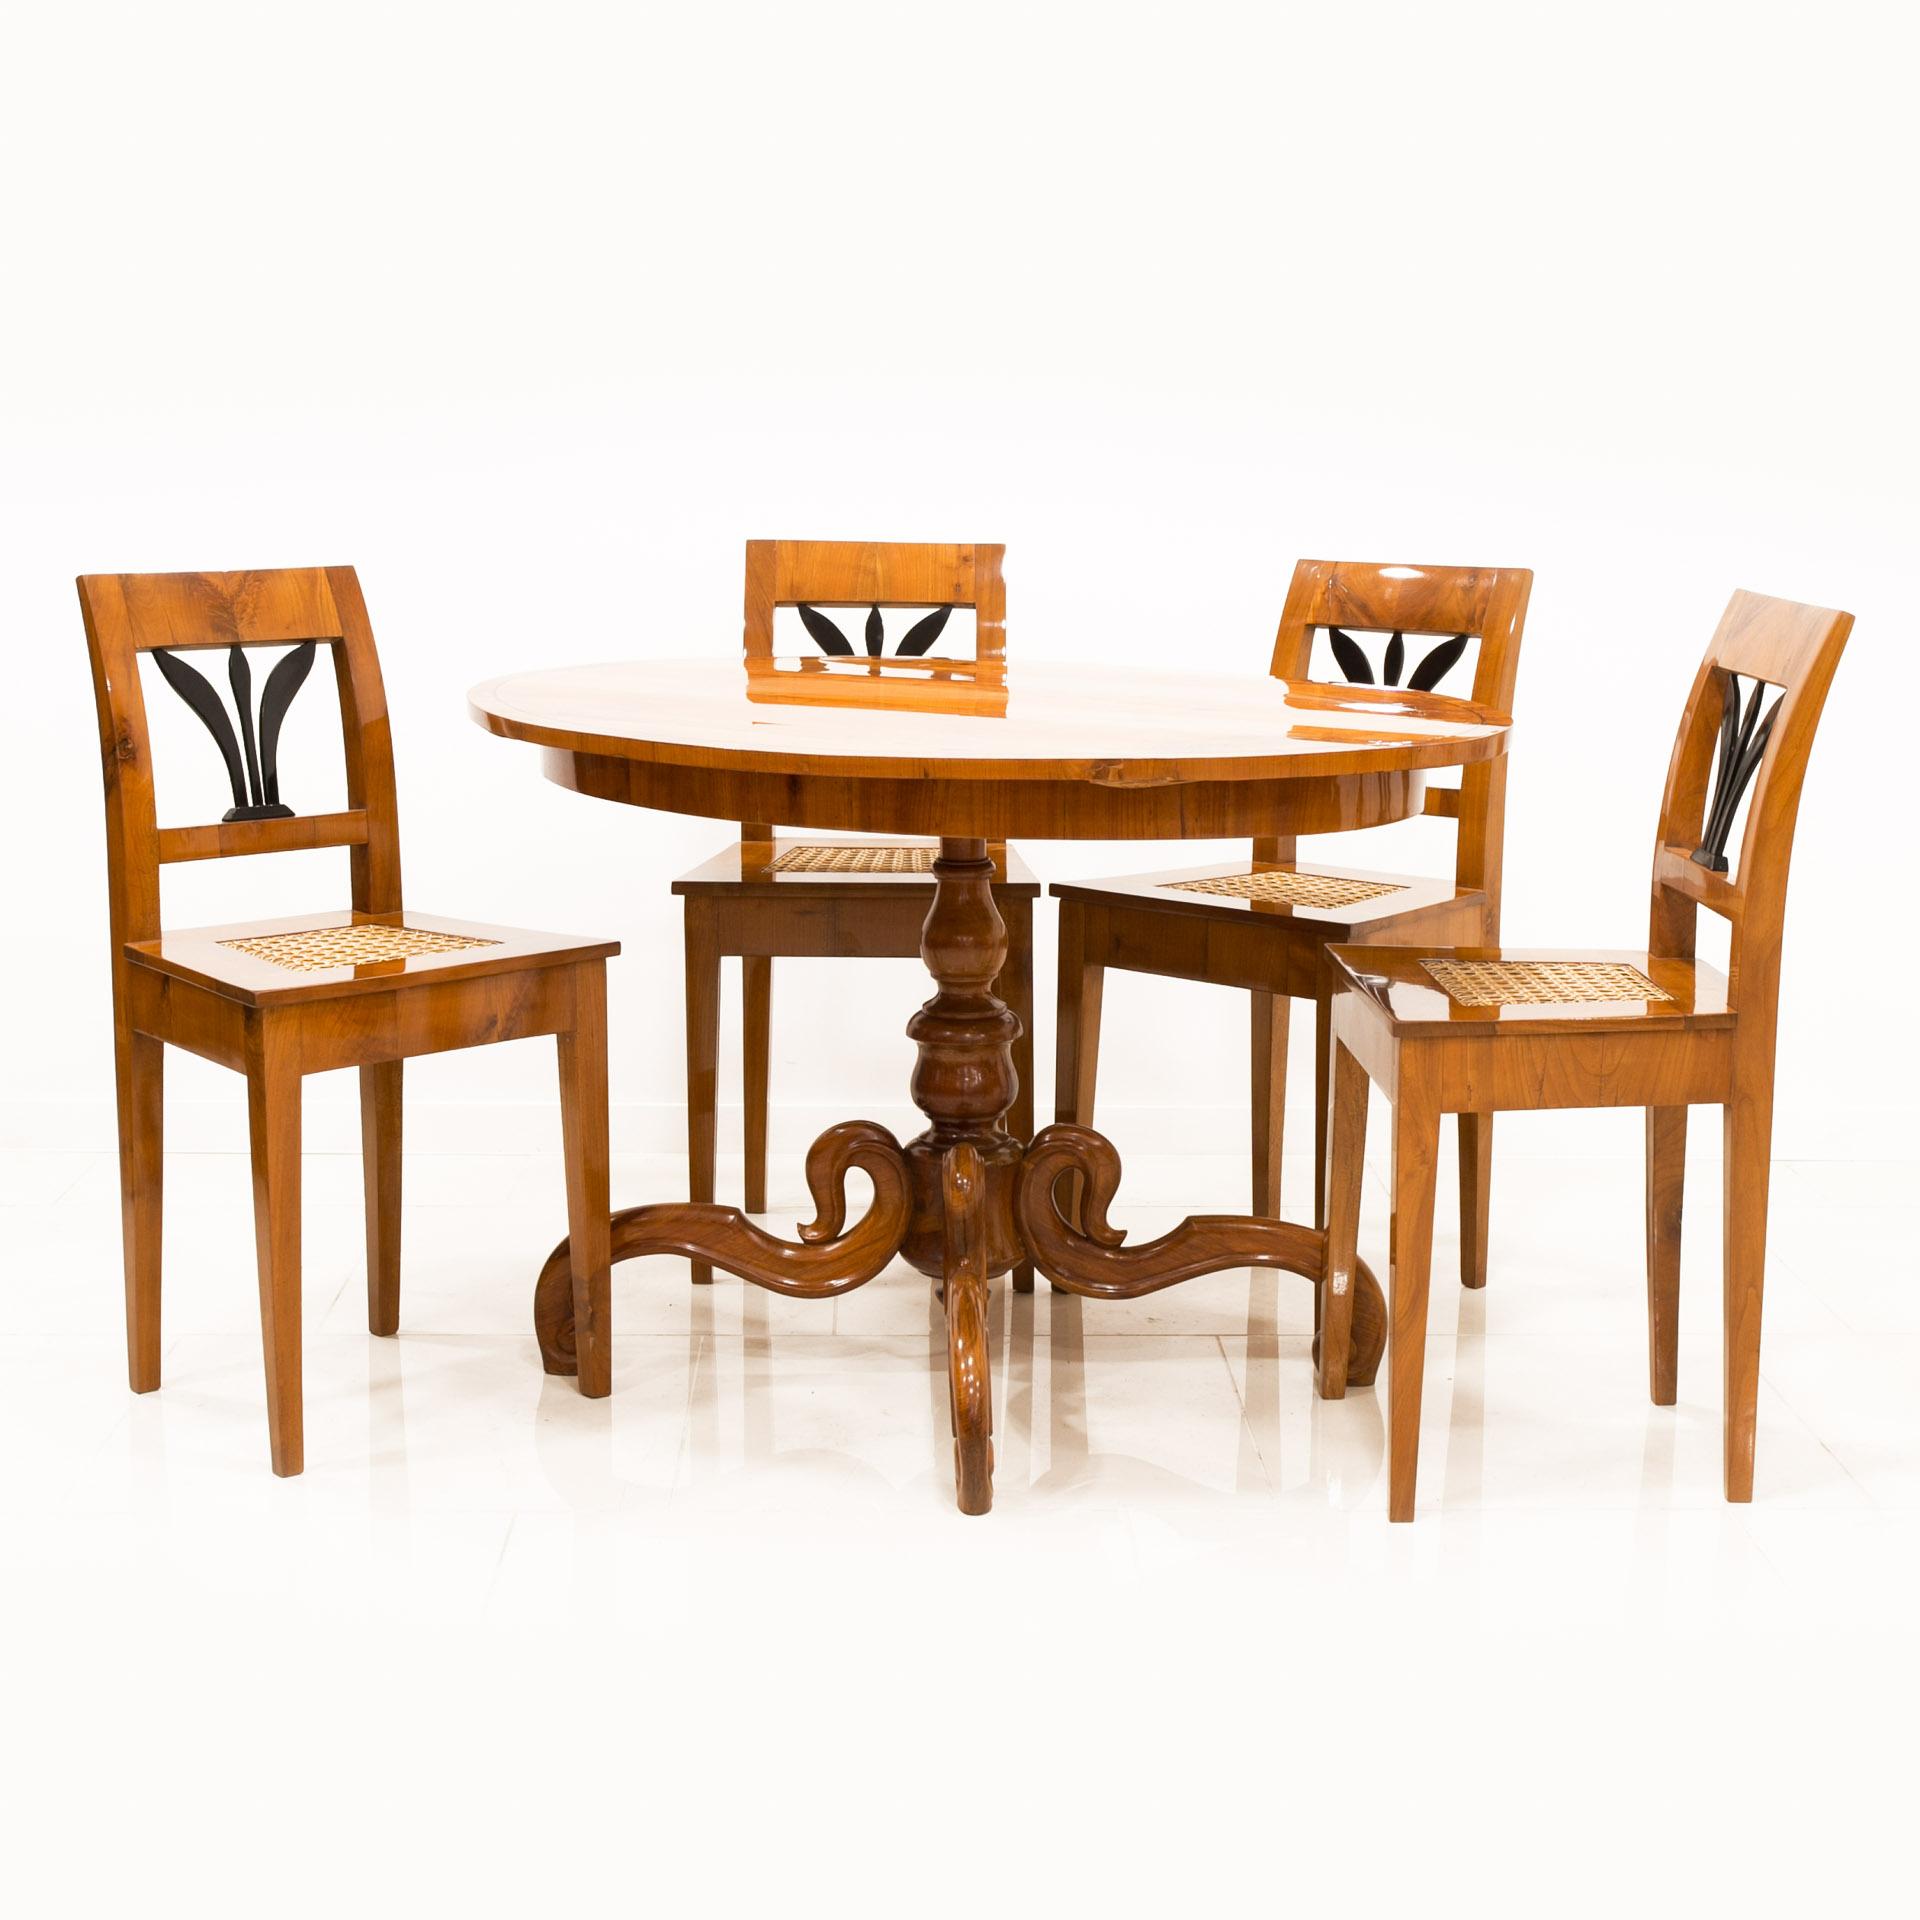 Set of four comfortable, original Biedermeier style chairs manufactured in Austria in 1st half on the 19th century. They are made of cherry wood, while the seats are made of a characteristic Viennese weave. Chairs are professionally renovated.